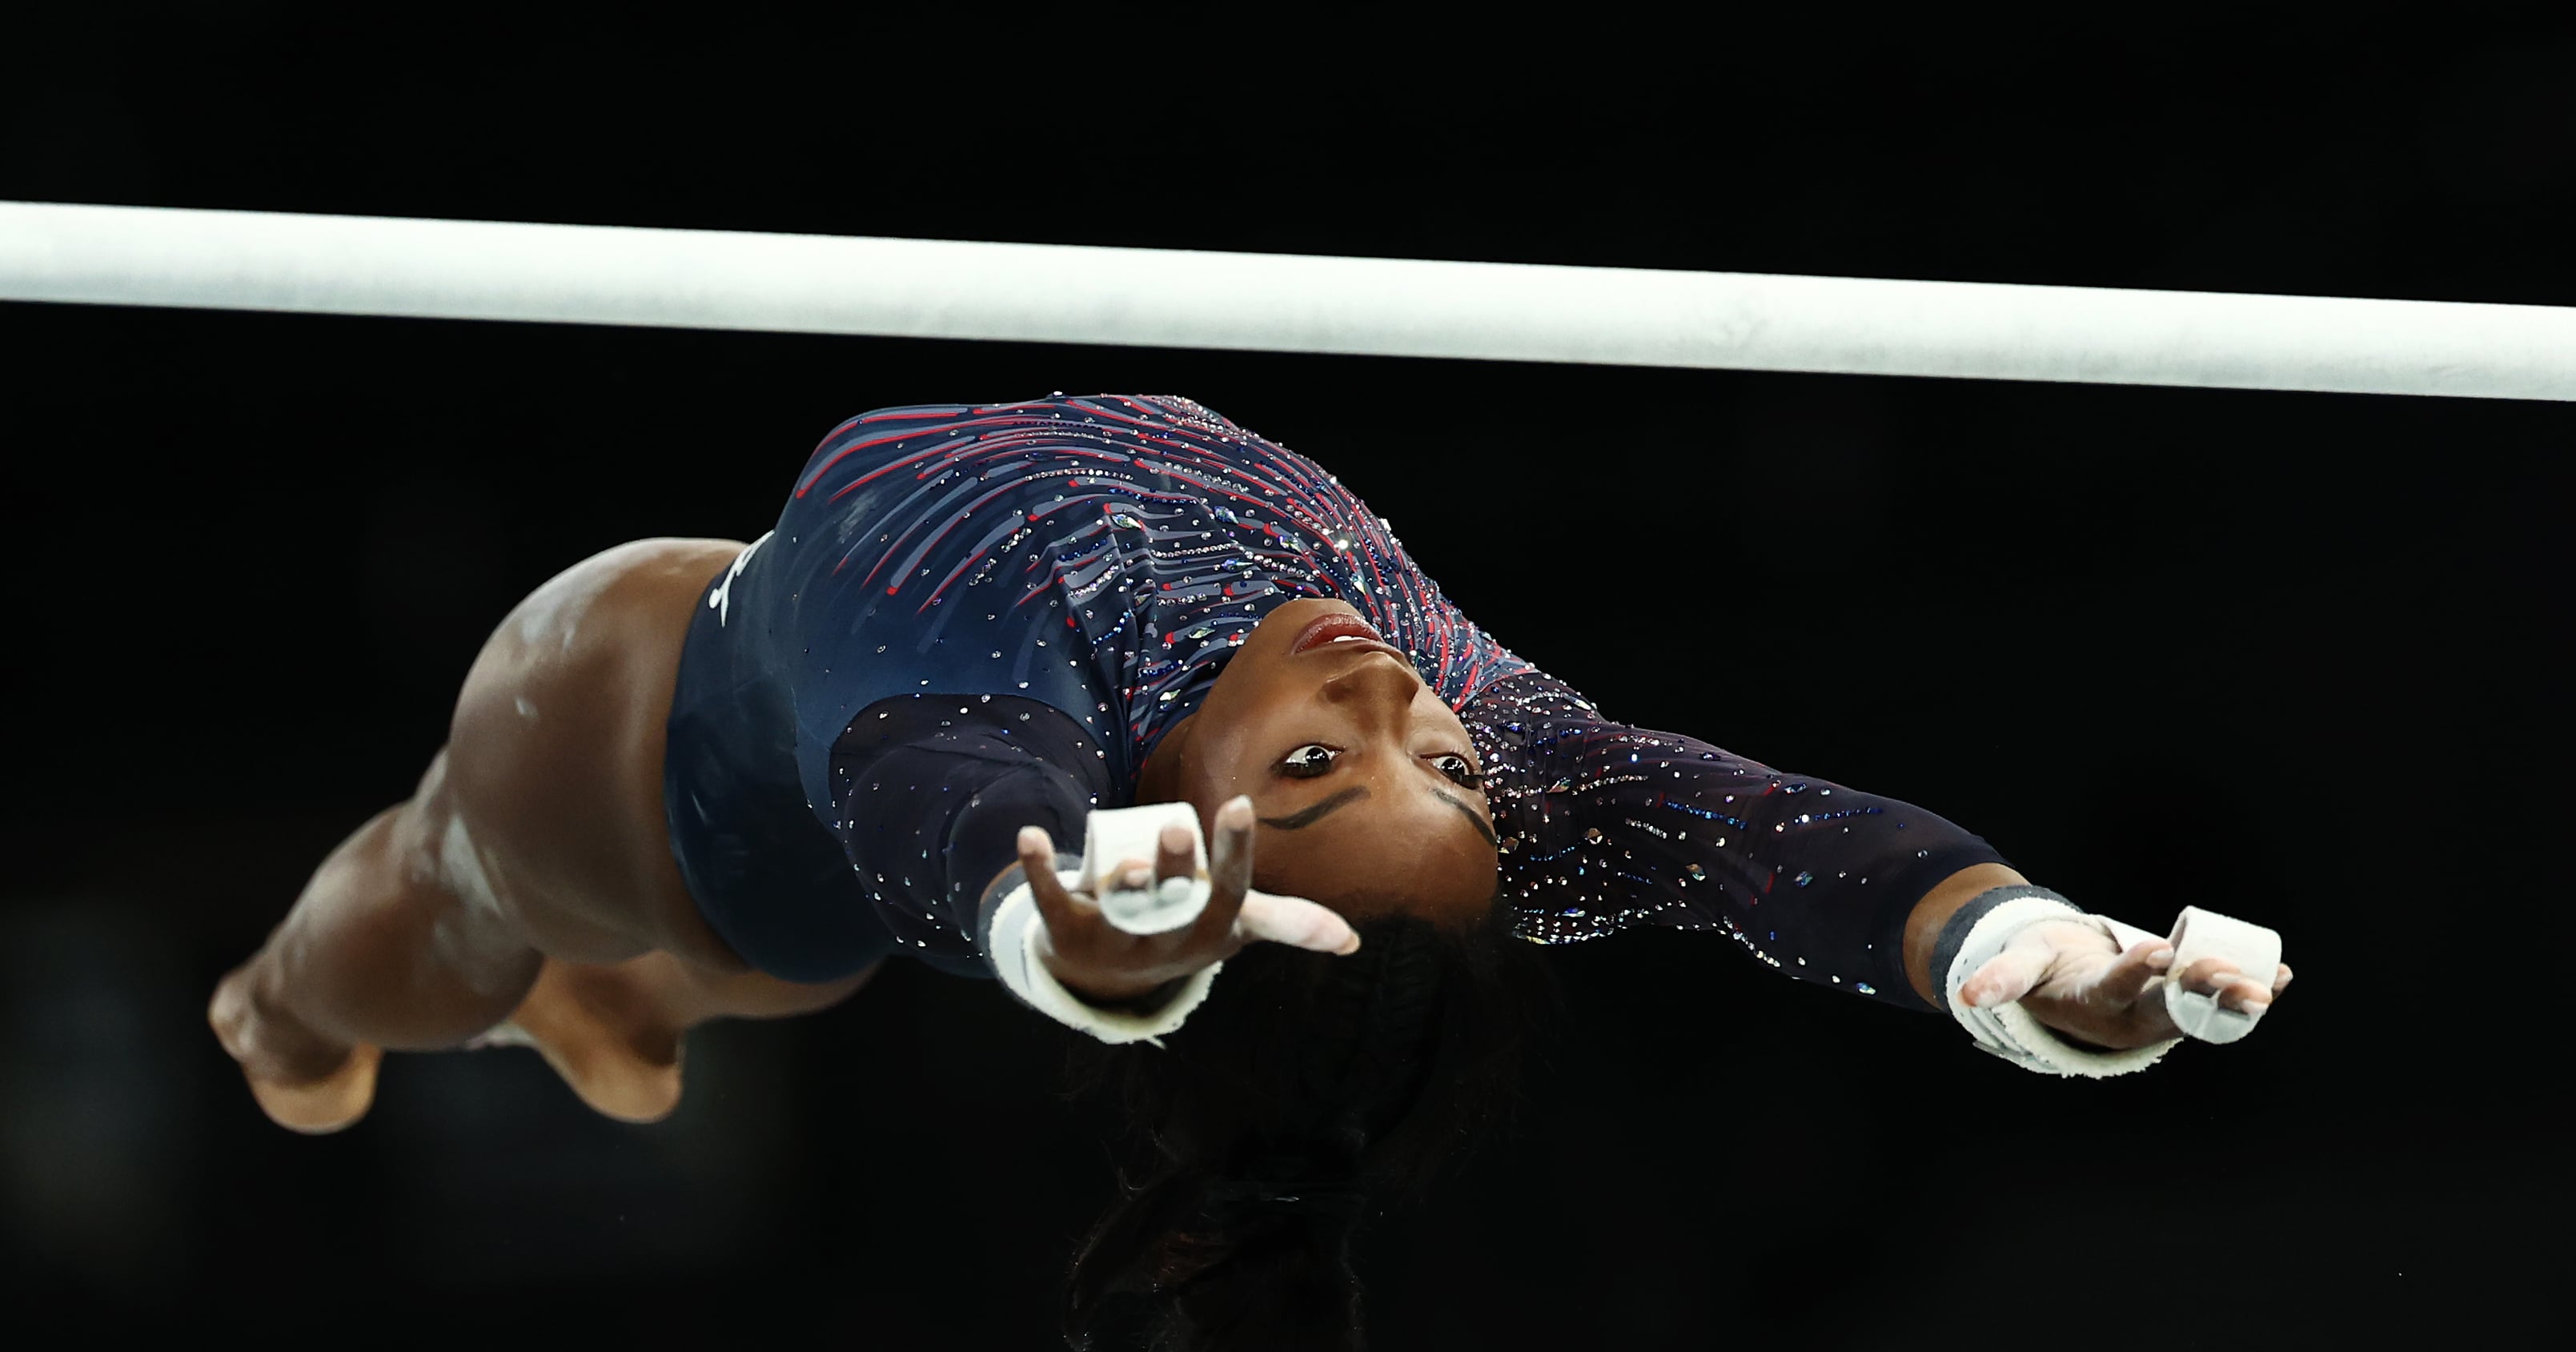 Simone Biles May Have Another Gymnastics Move Named After Her at the Olympics